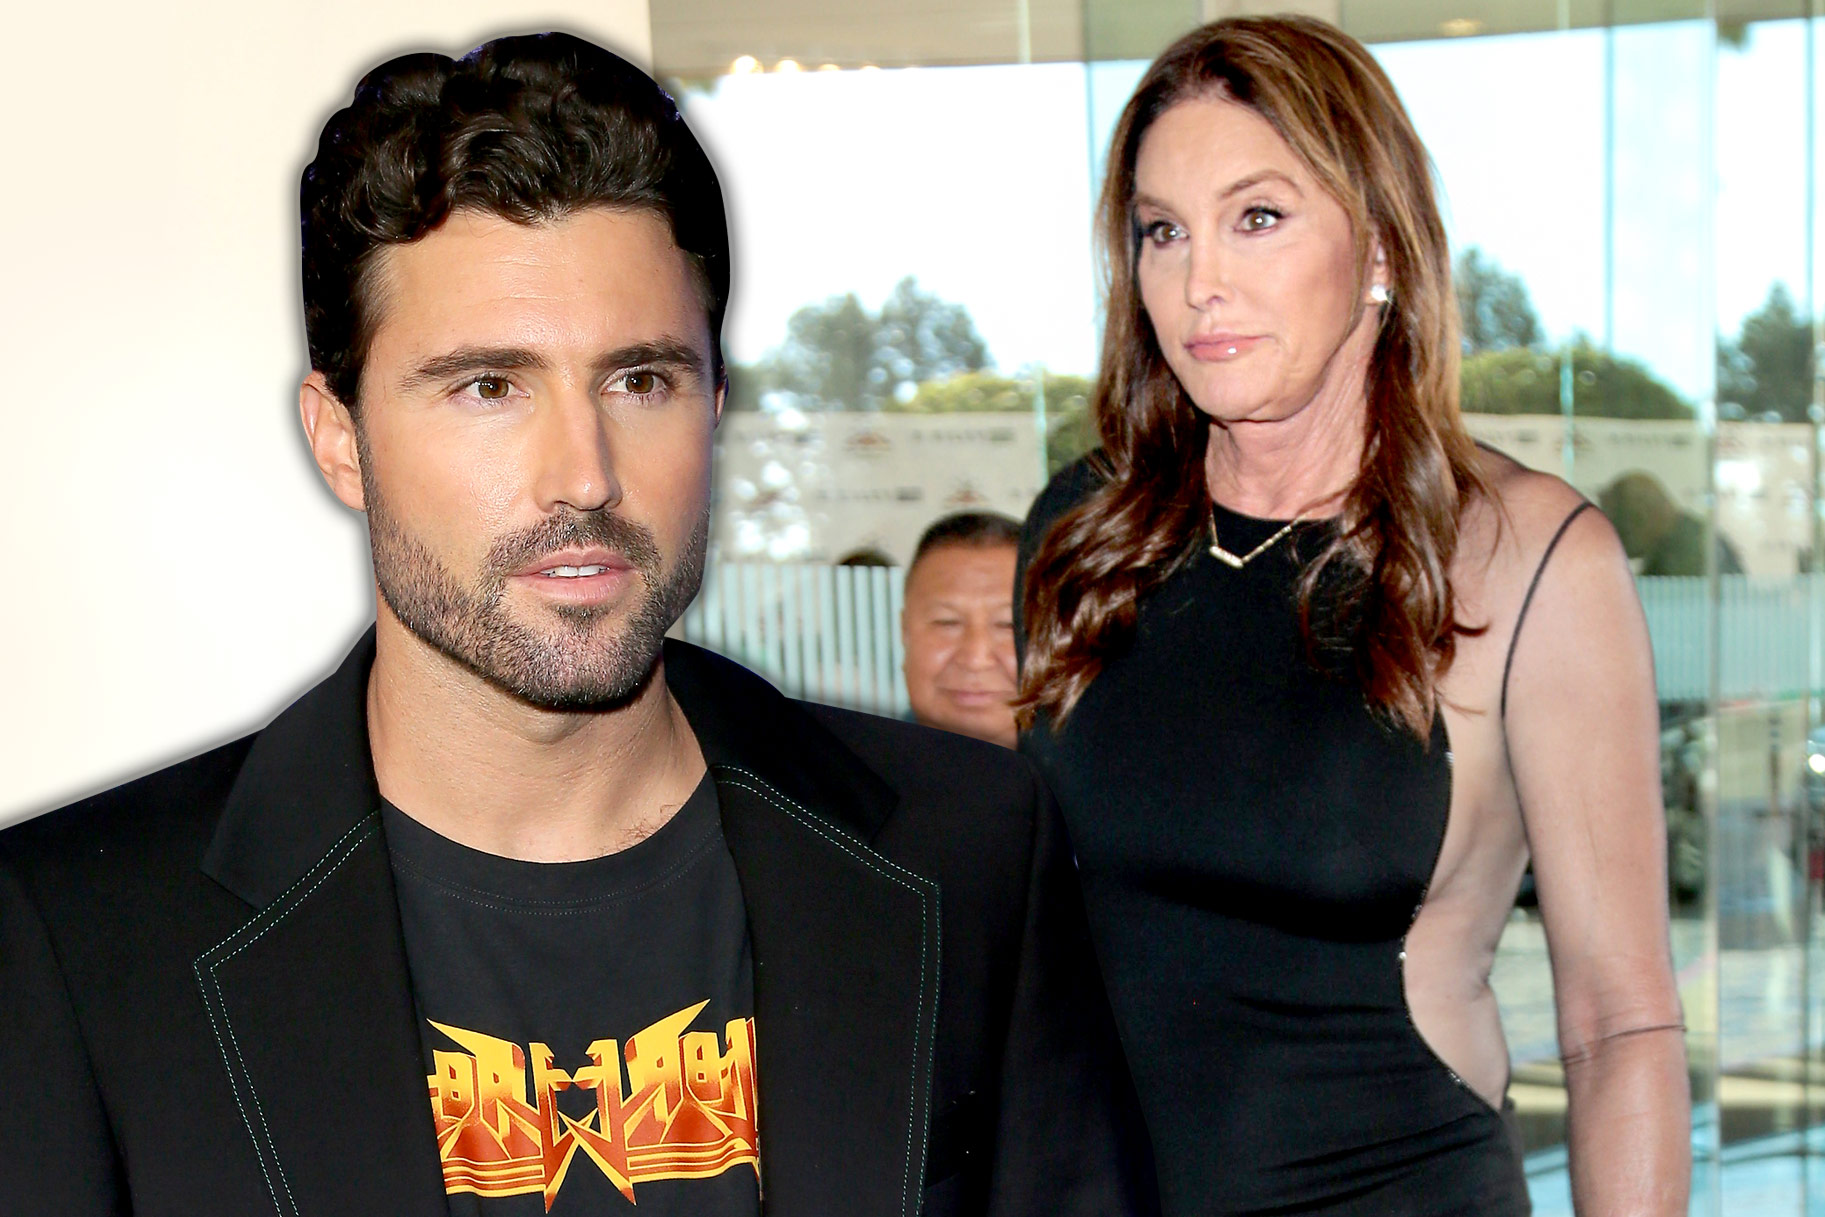 Brody and Caitlyn Jenner